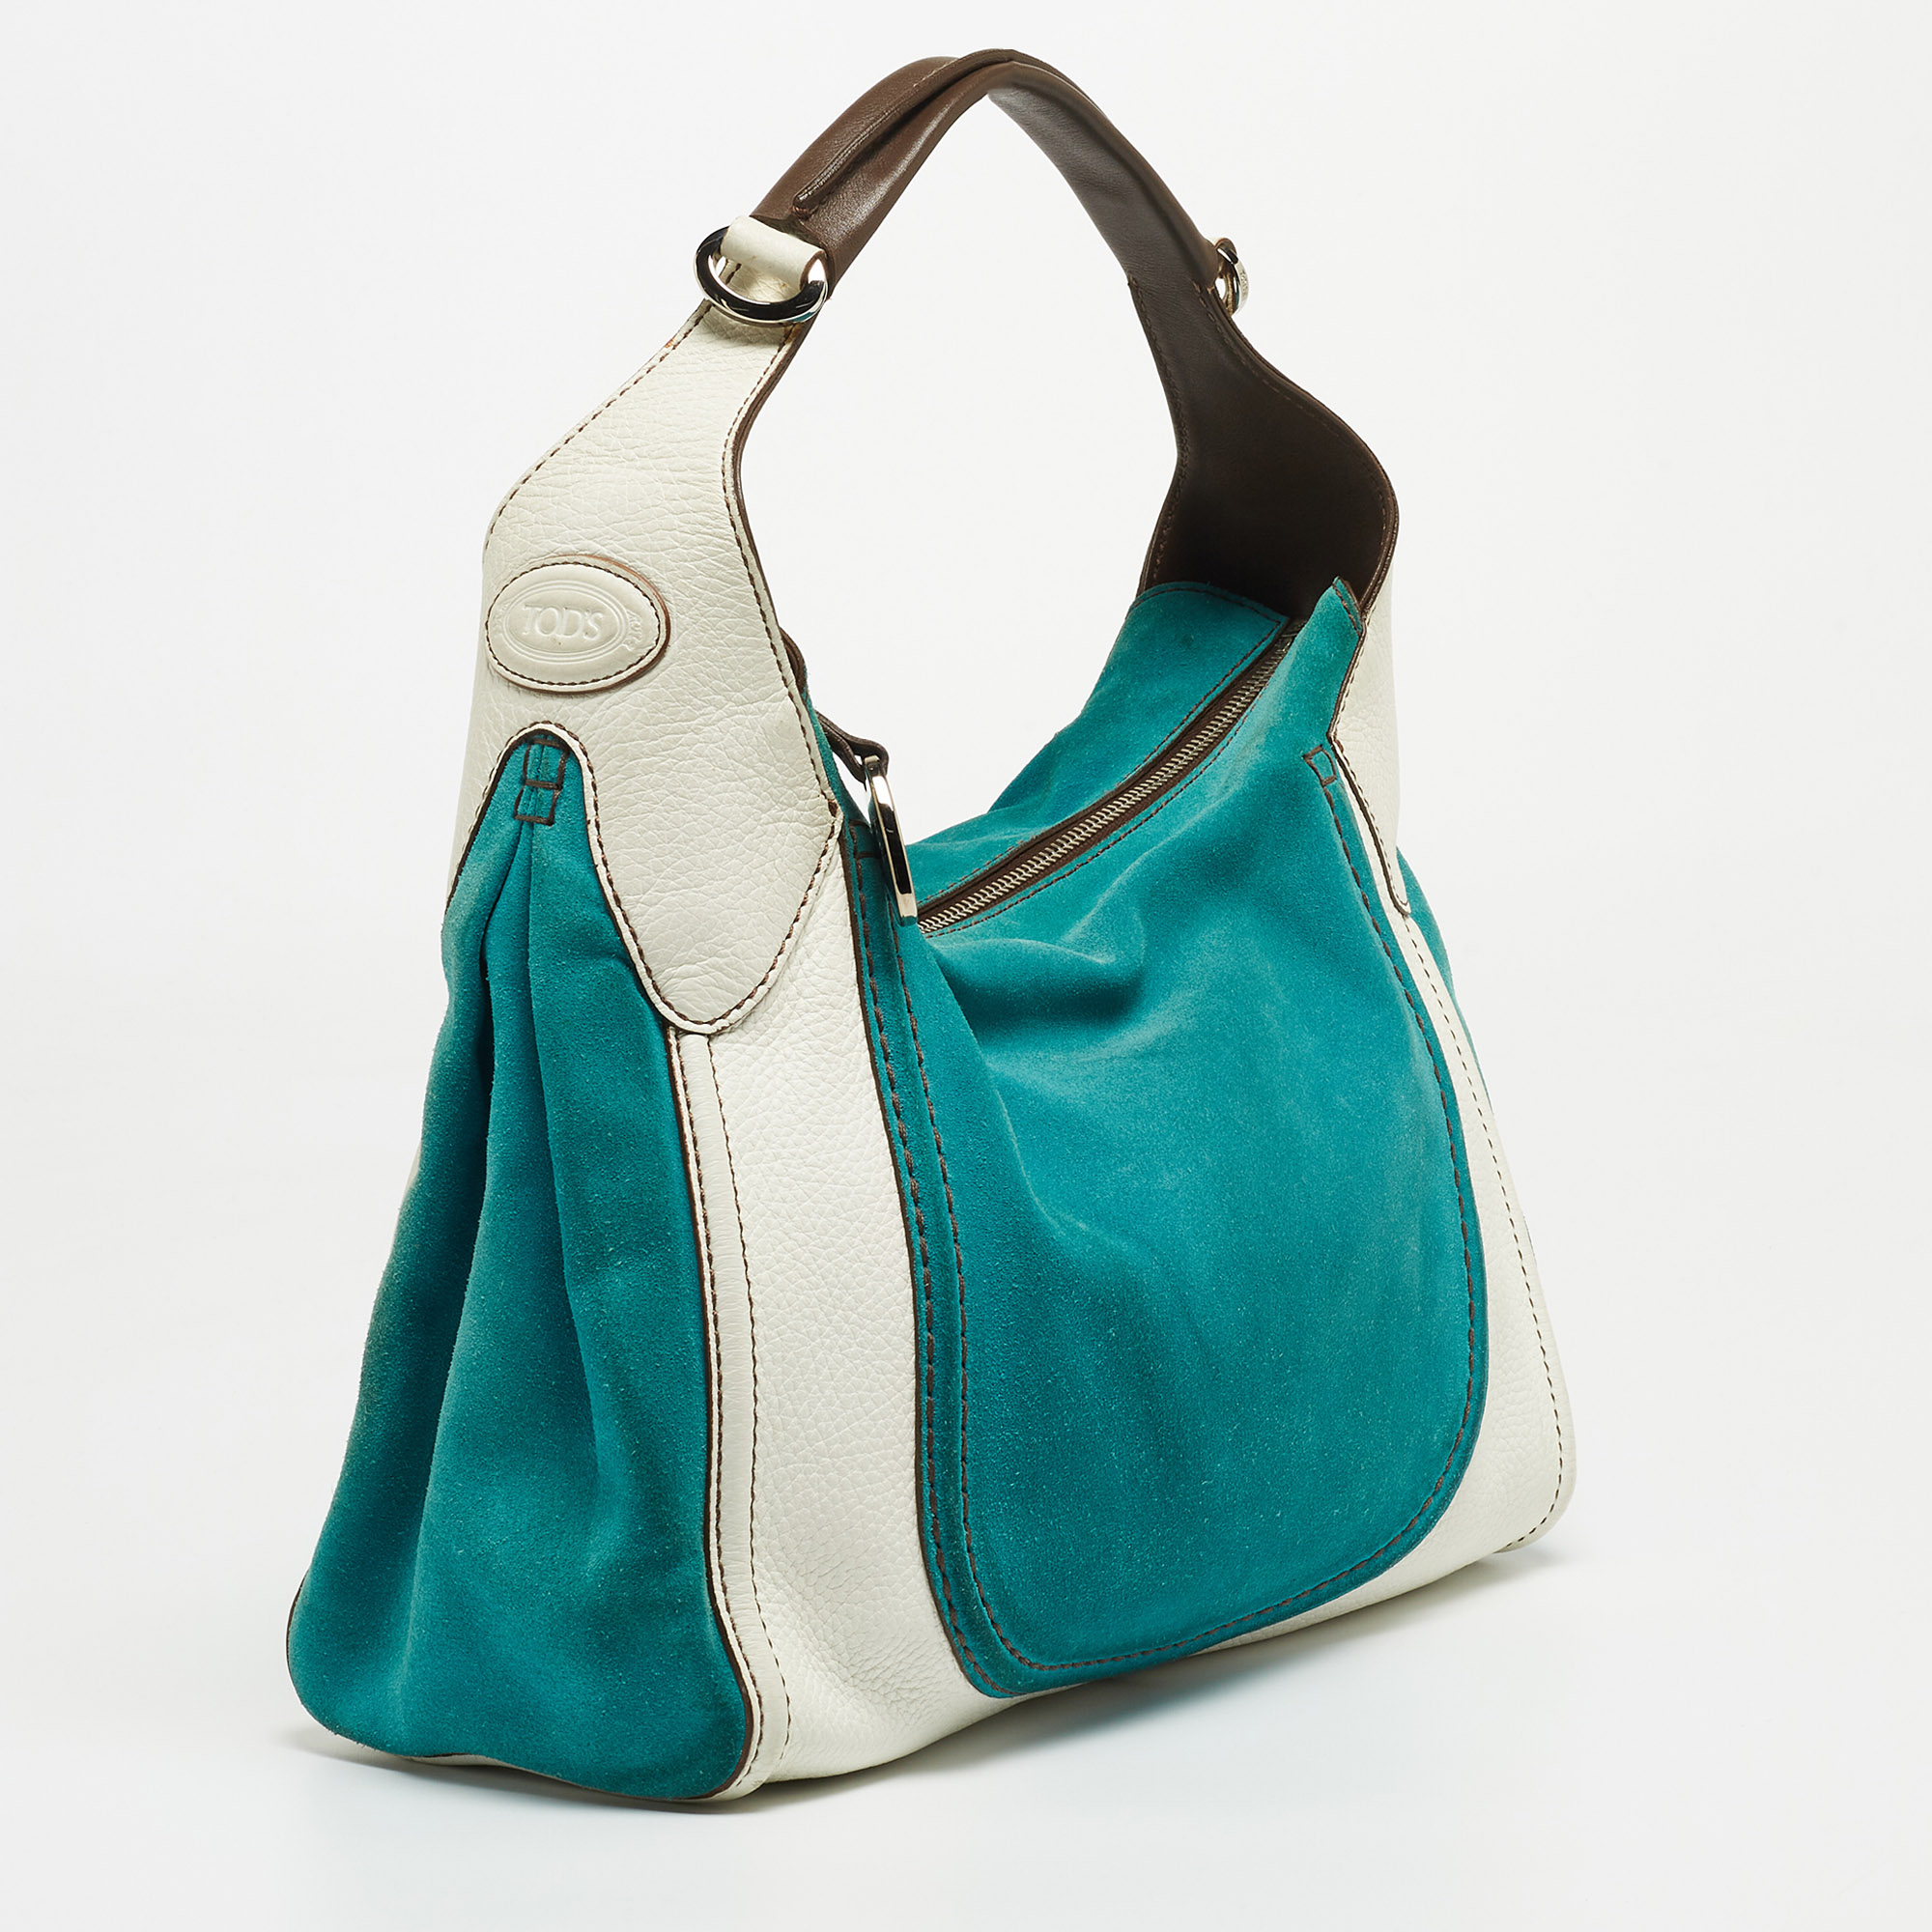 Tod's Teal Blue/White Leather And Suede Hobo